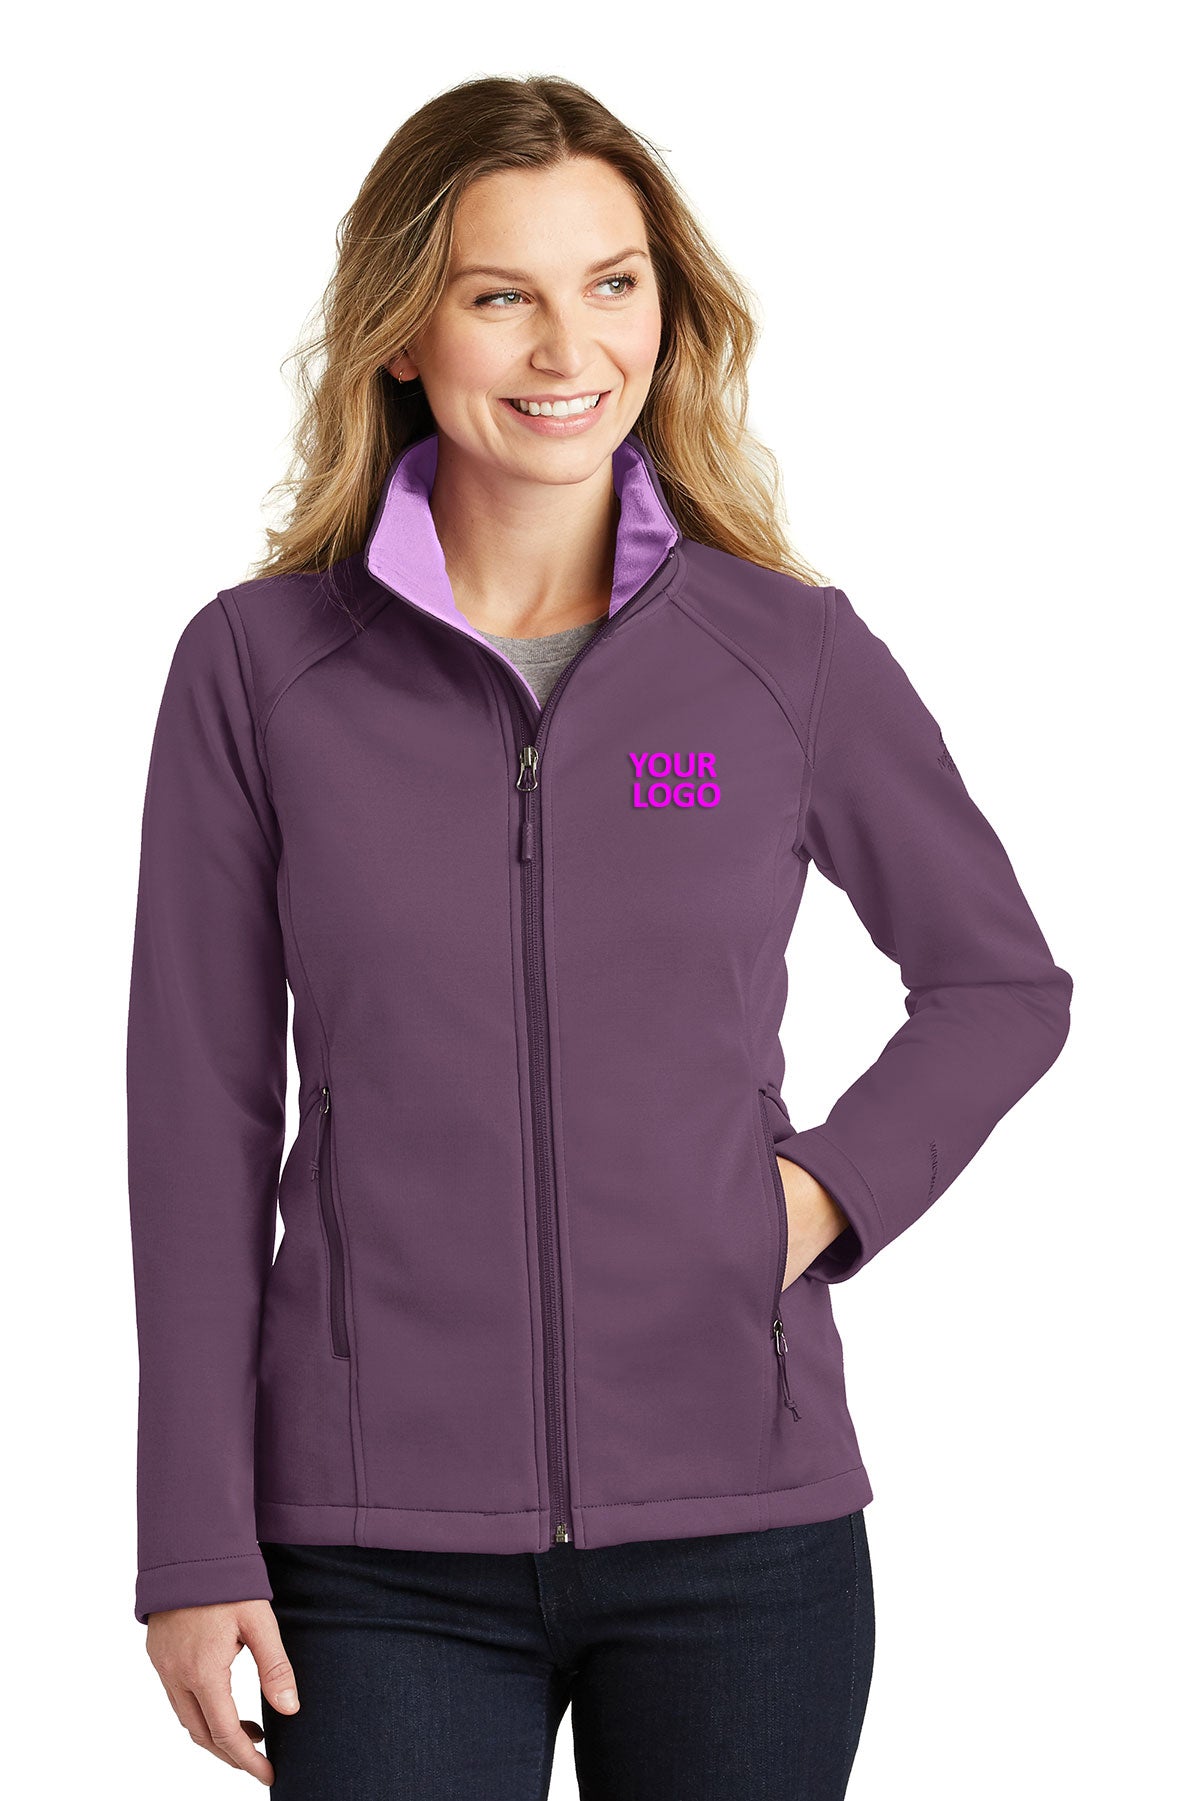 The North Face Blackberry Wine NF0A3LGY business jackets with logo